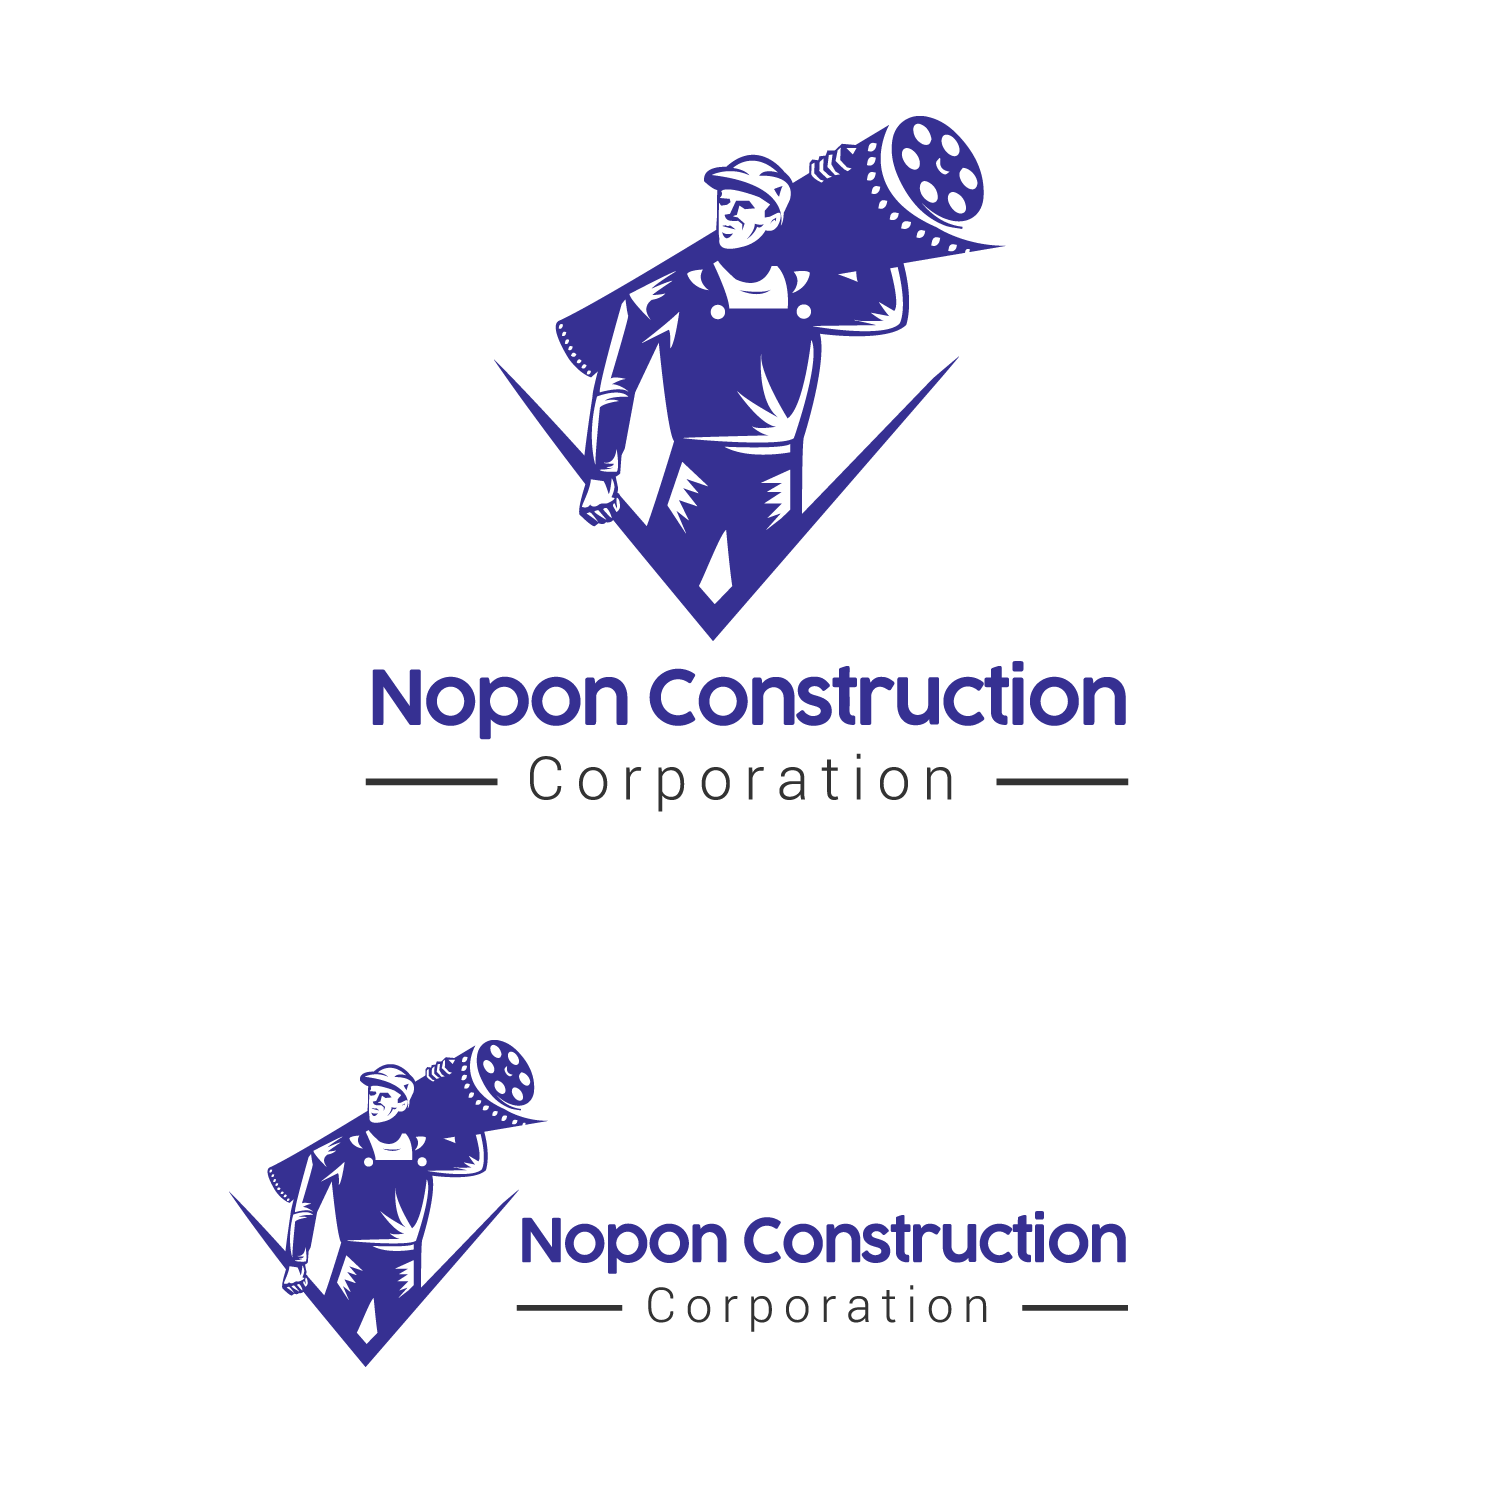 Google Construction Logo - 55 Construction Logo Designs For Architects and Builders